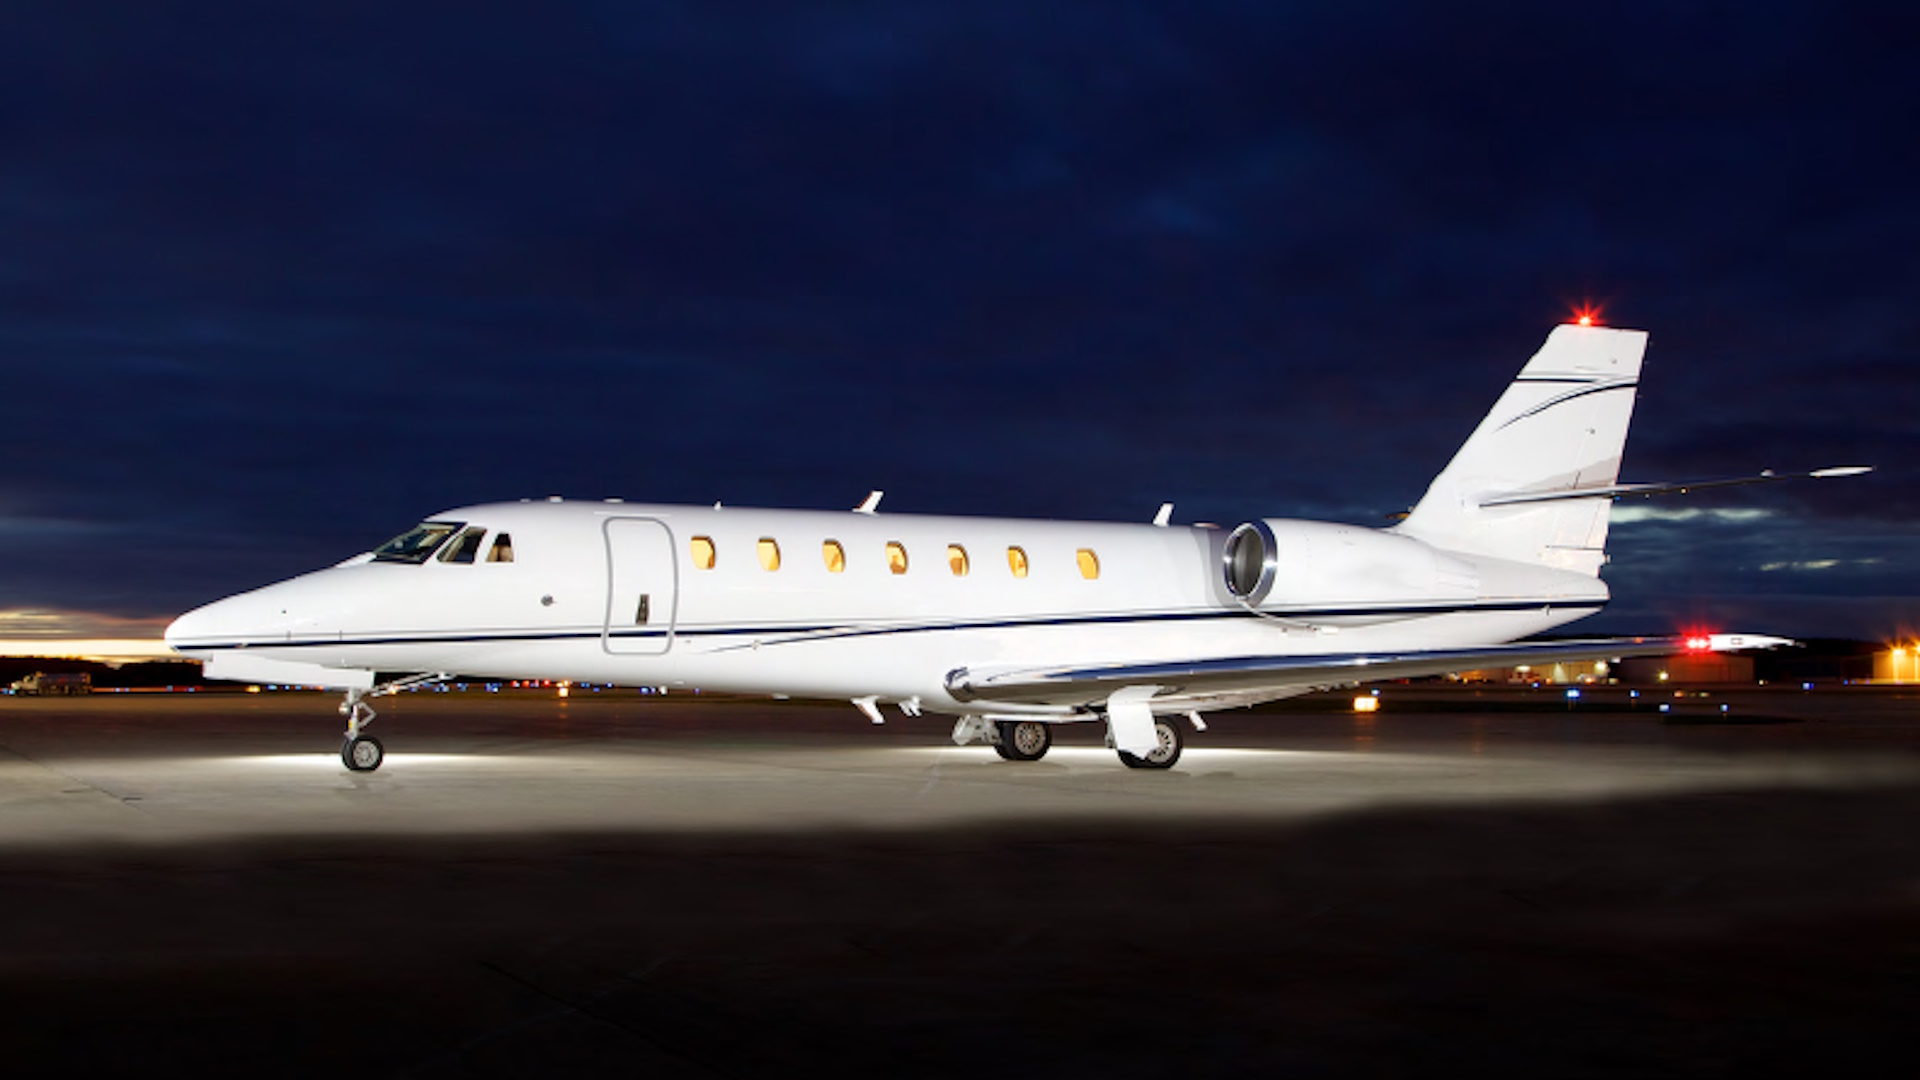 Alerion Citation Sovereign - N369FG available for private charter by Alerion Aviation.